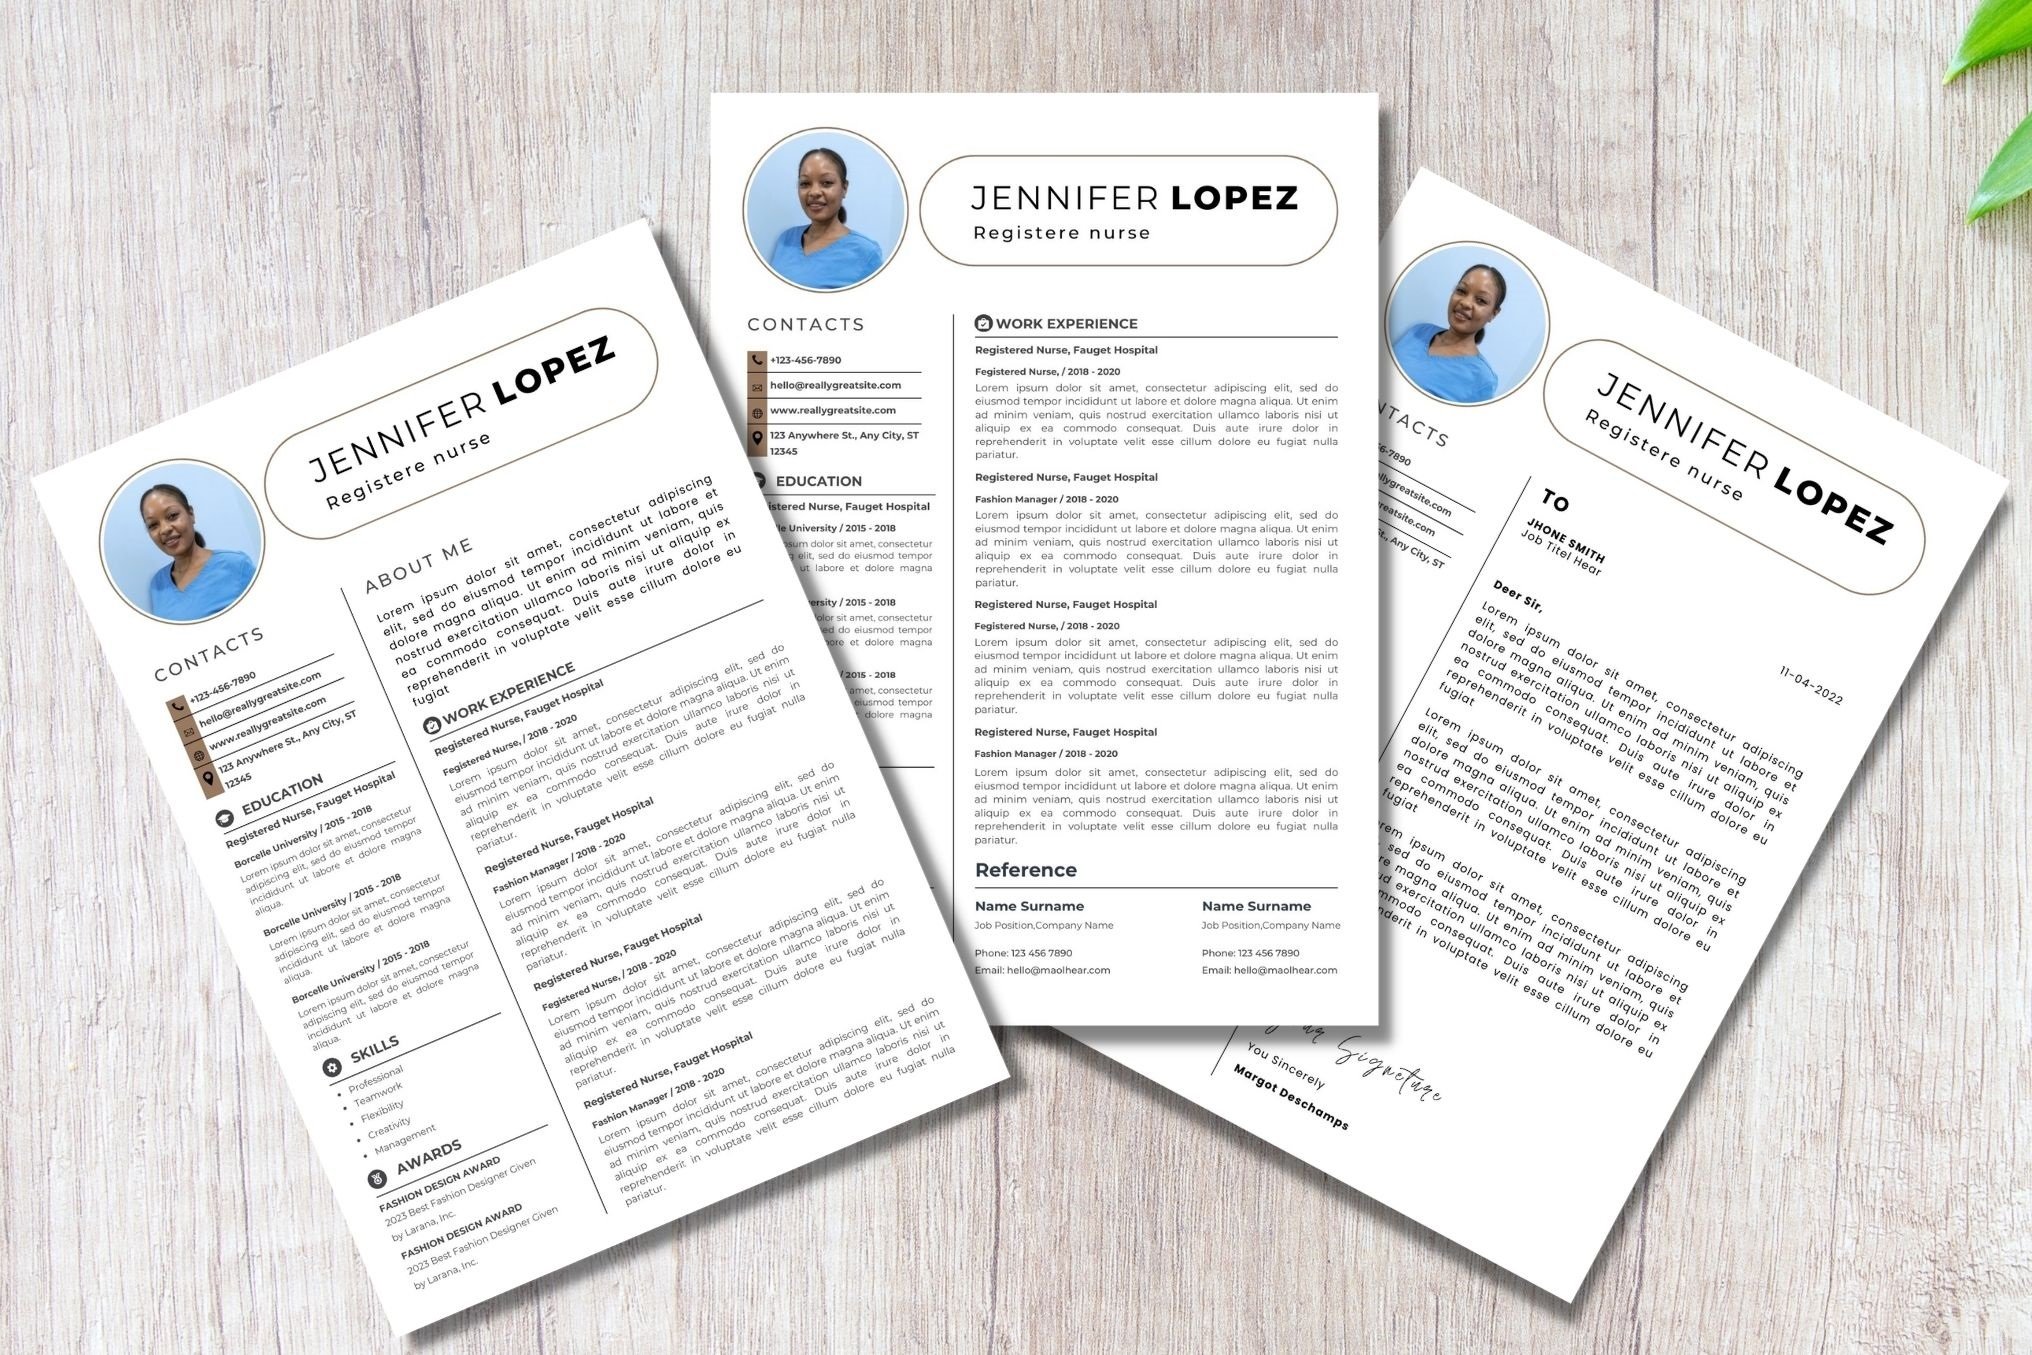 Three resume templates on a wooden table.